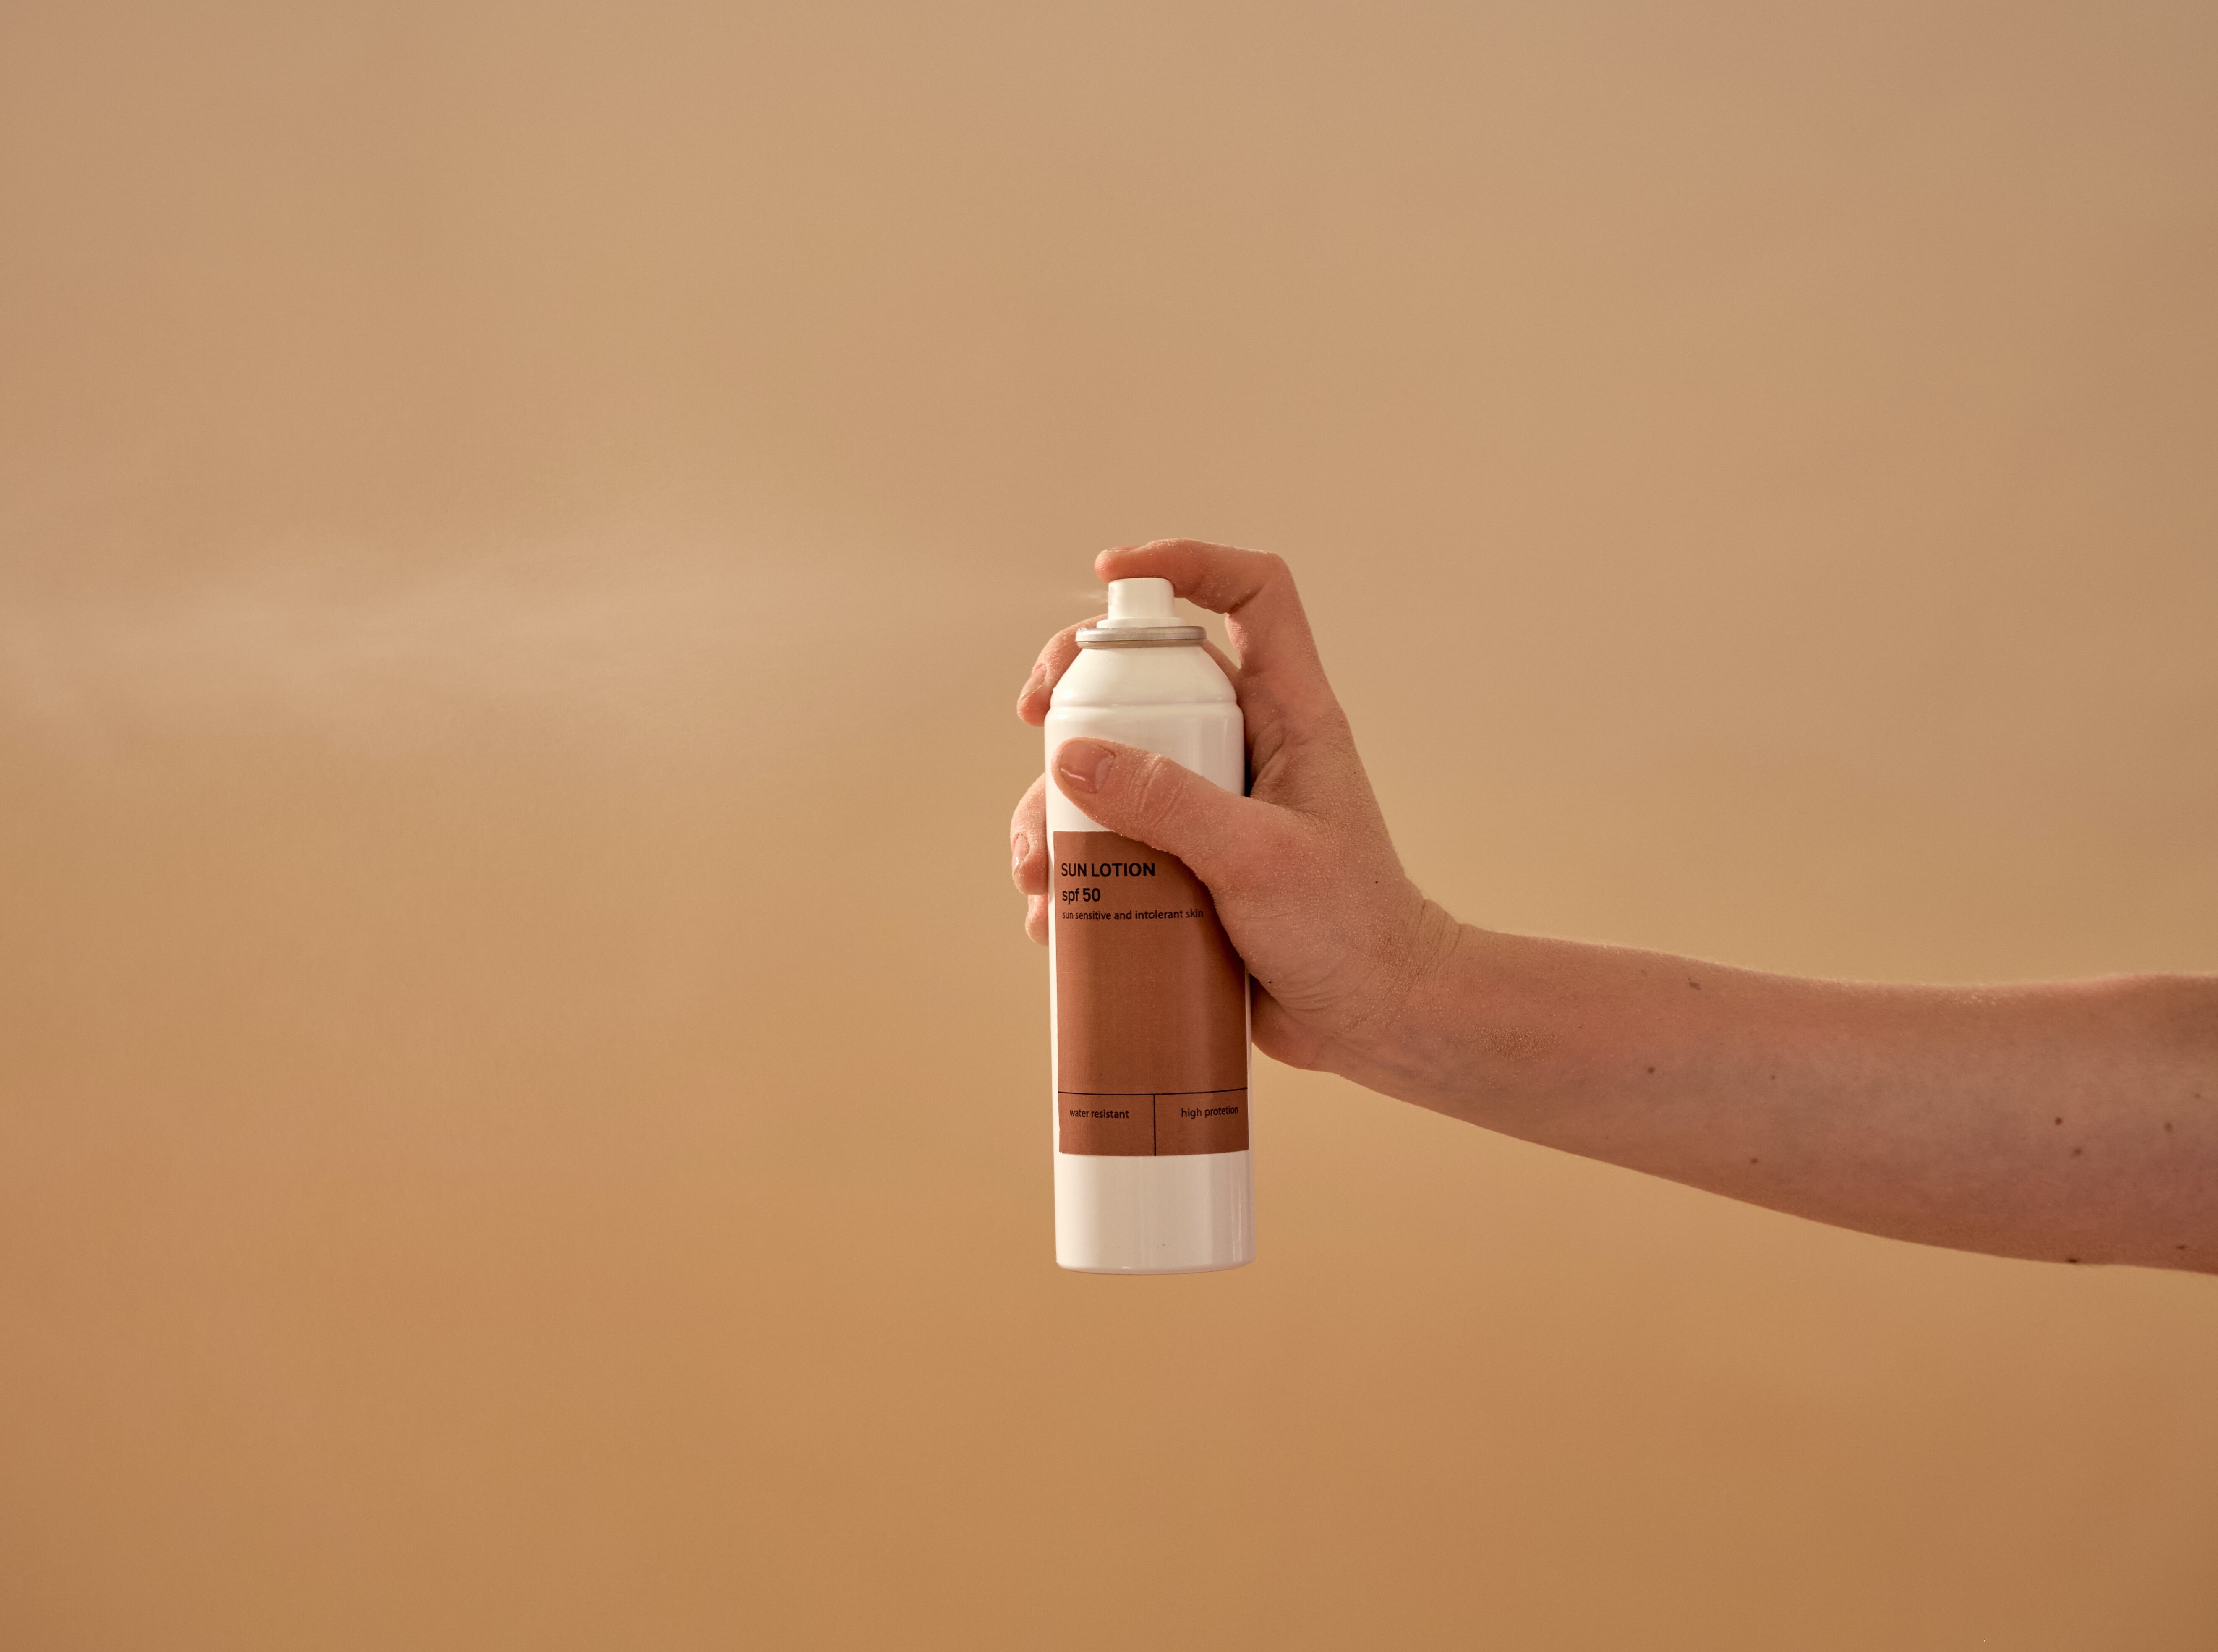 Why You Should Choose Bag on Valve for Aerosol Spray Products